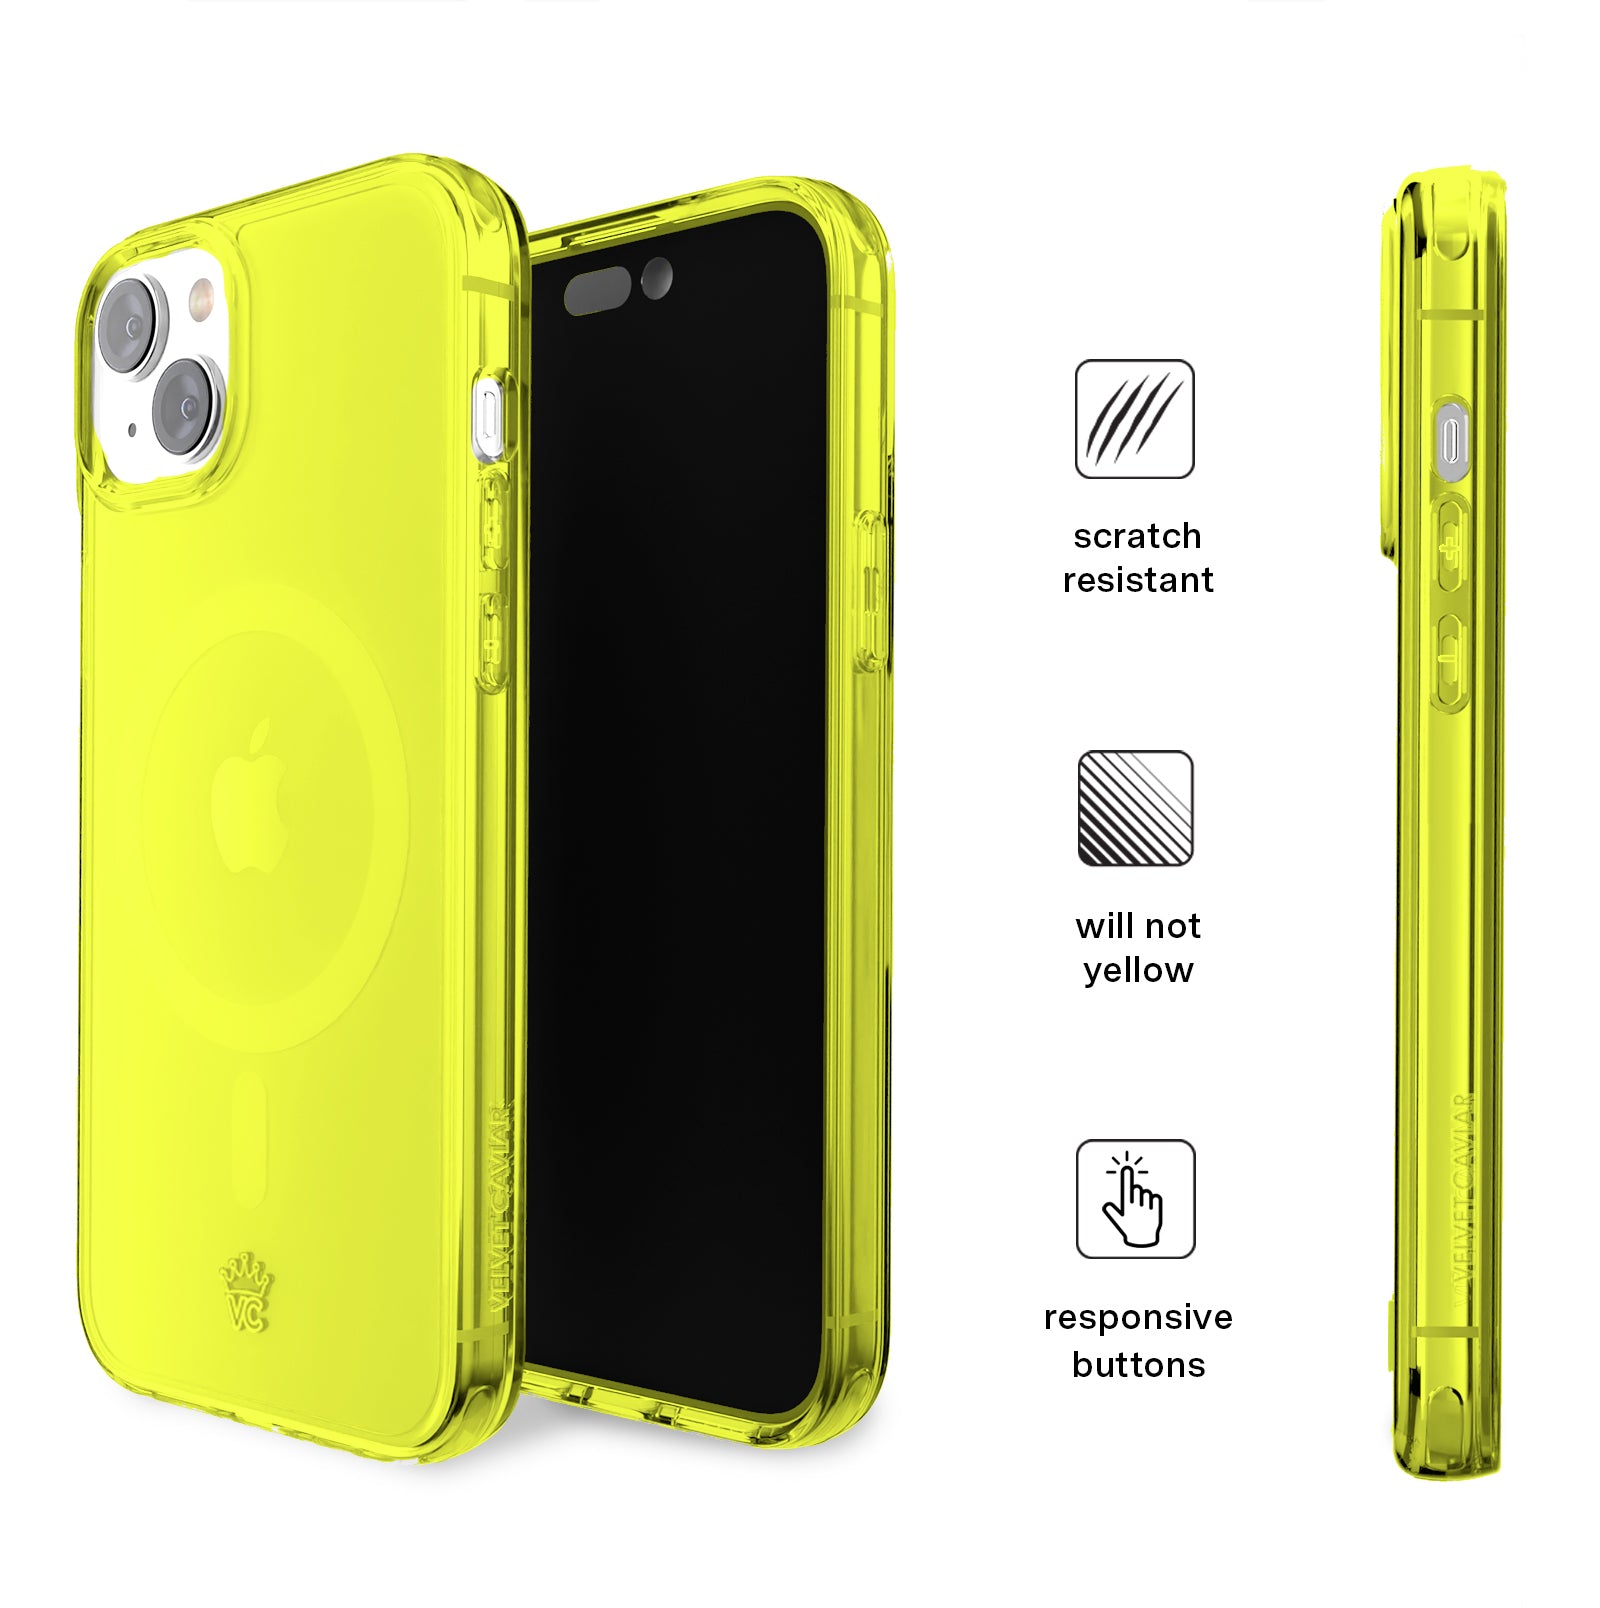 ForCOLOR Plastic Eraser - Neon Yellow – Case for Making